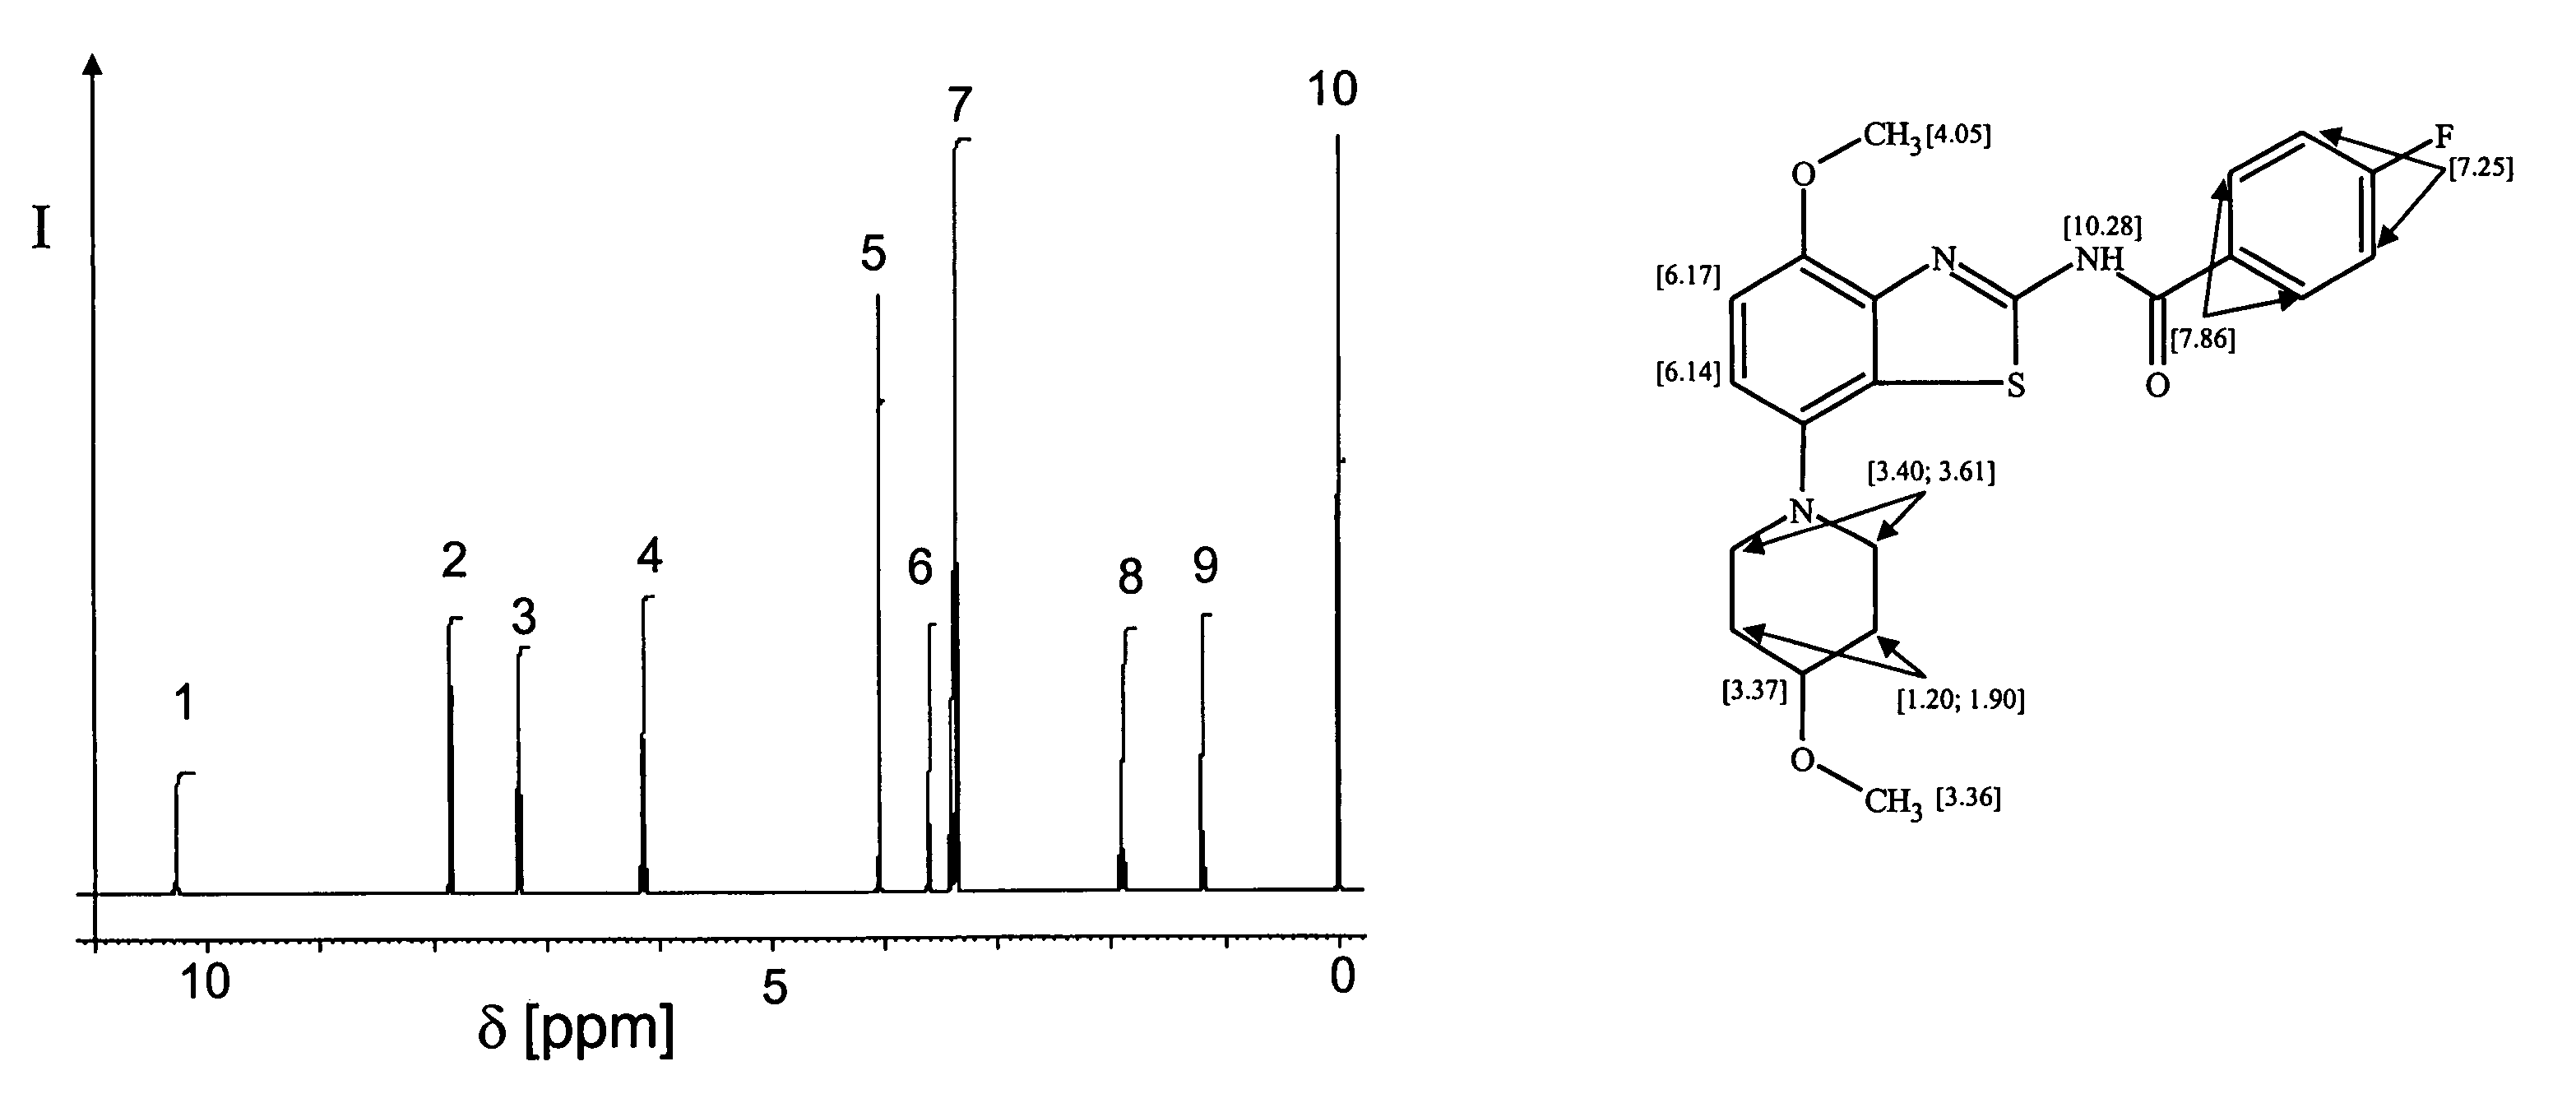 Method for estimating the number of nuclei of a preselected isotope in a molecular species from and NMR spectrum